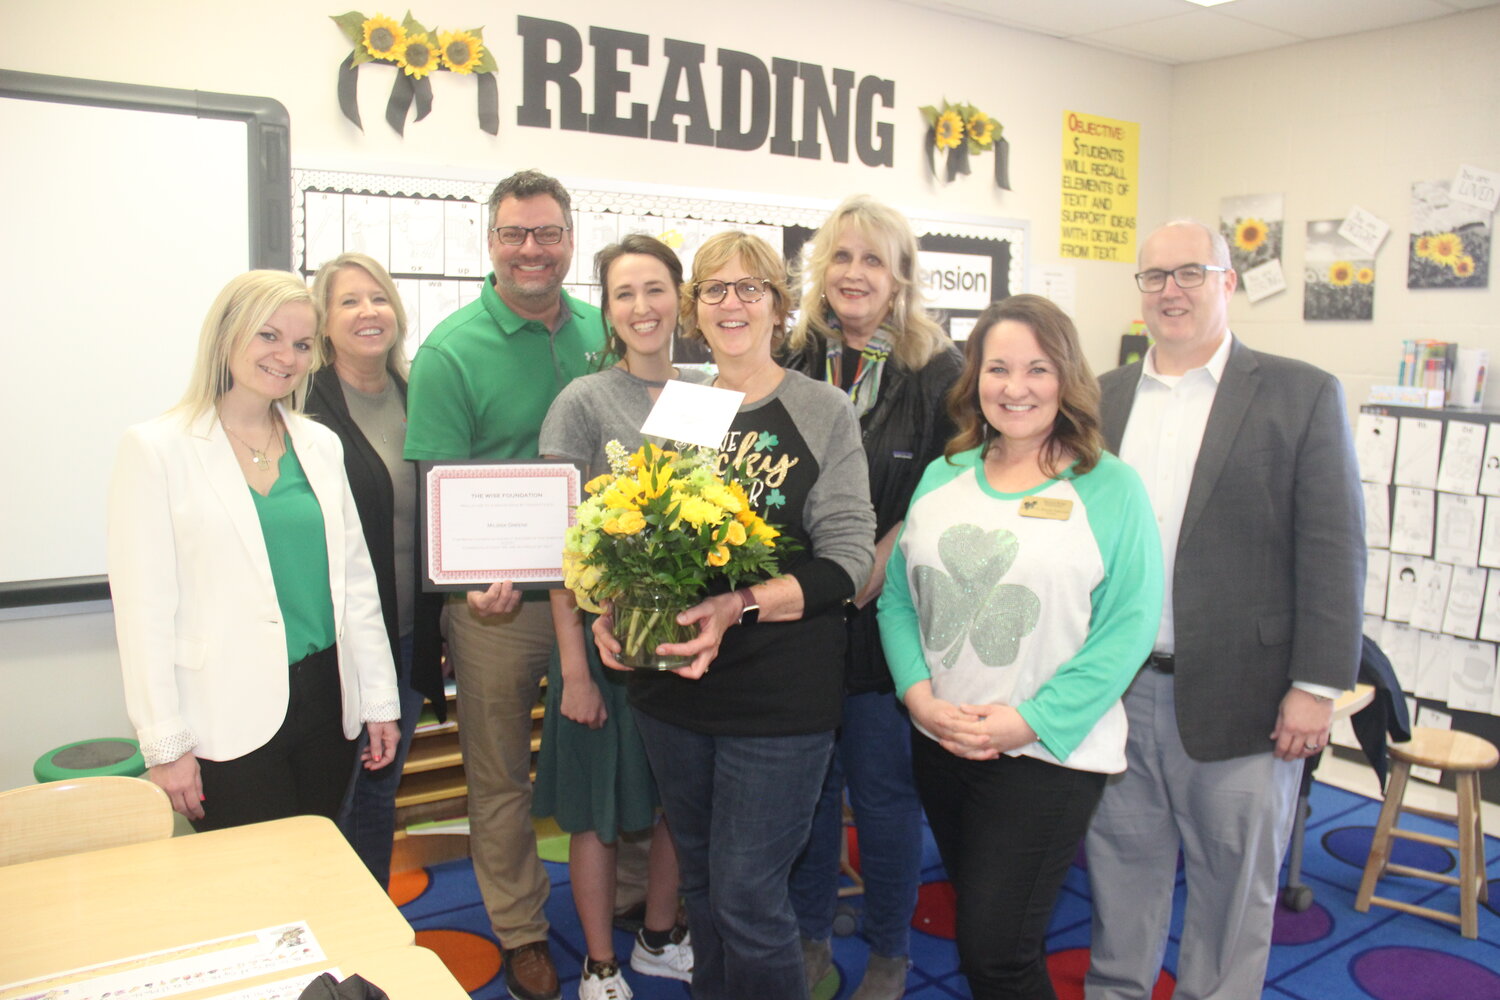 TEACHER OF THE YEAR — Milissa Greene (center) is Warren County R-III School District’s Teacher of the Year. Greene is a special education teacher at Warrior Ridge Elementary. She was joined by coworkers to congratulate her for the award.